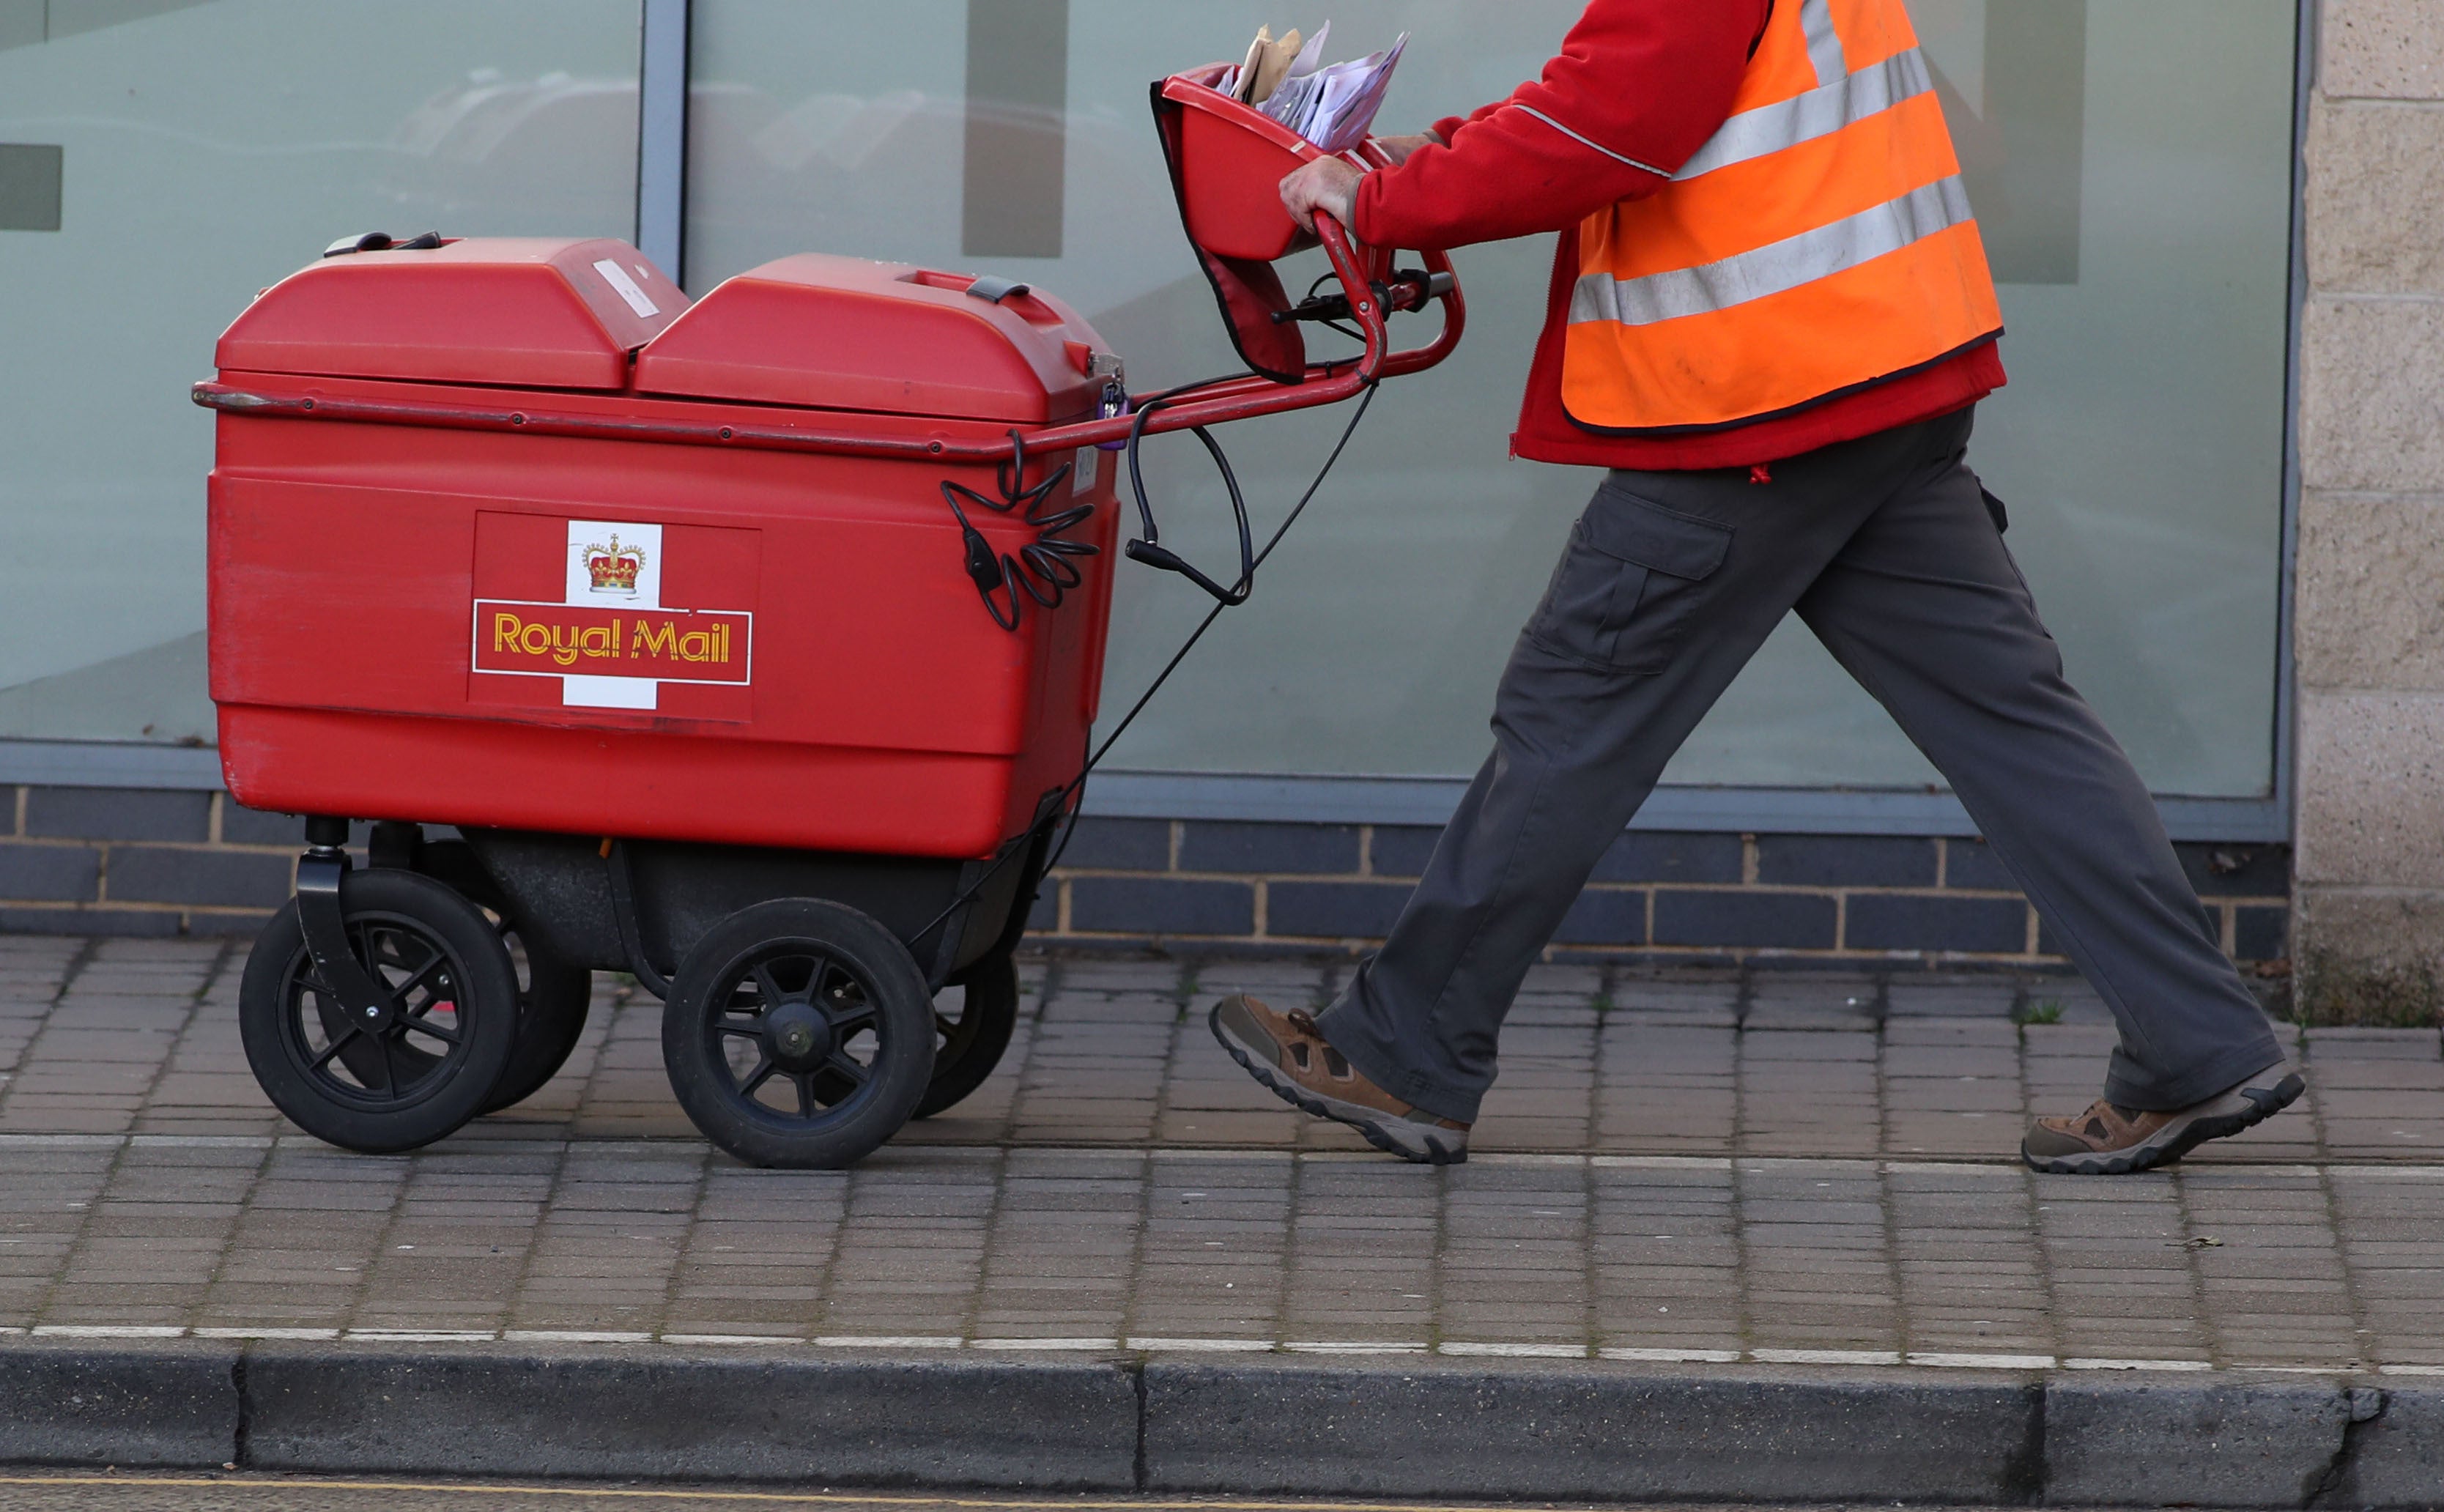 Royal Mail is expected to post higher profits amid cost savings from job cuts (Steve Parsons/PA)